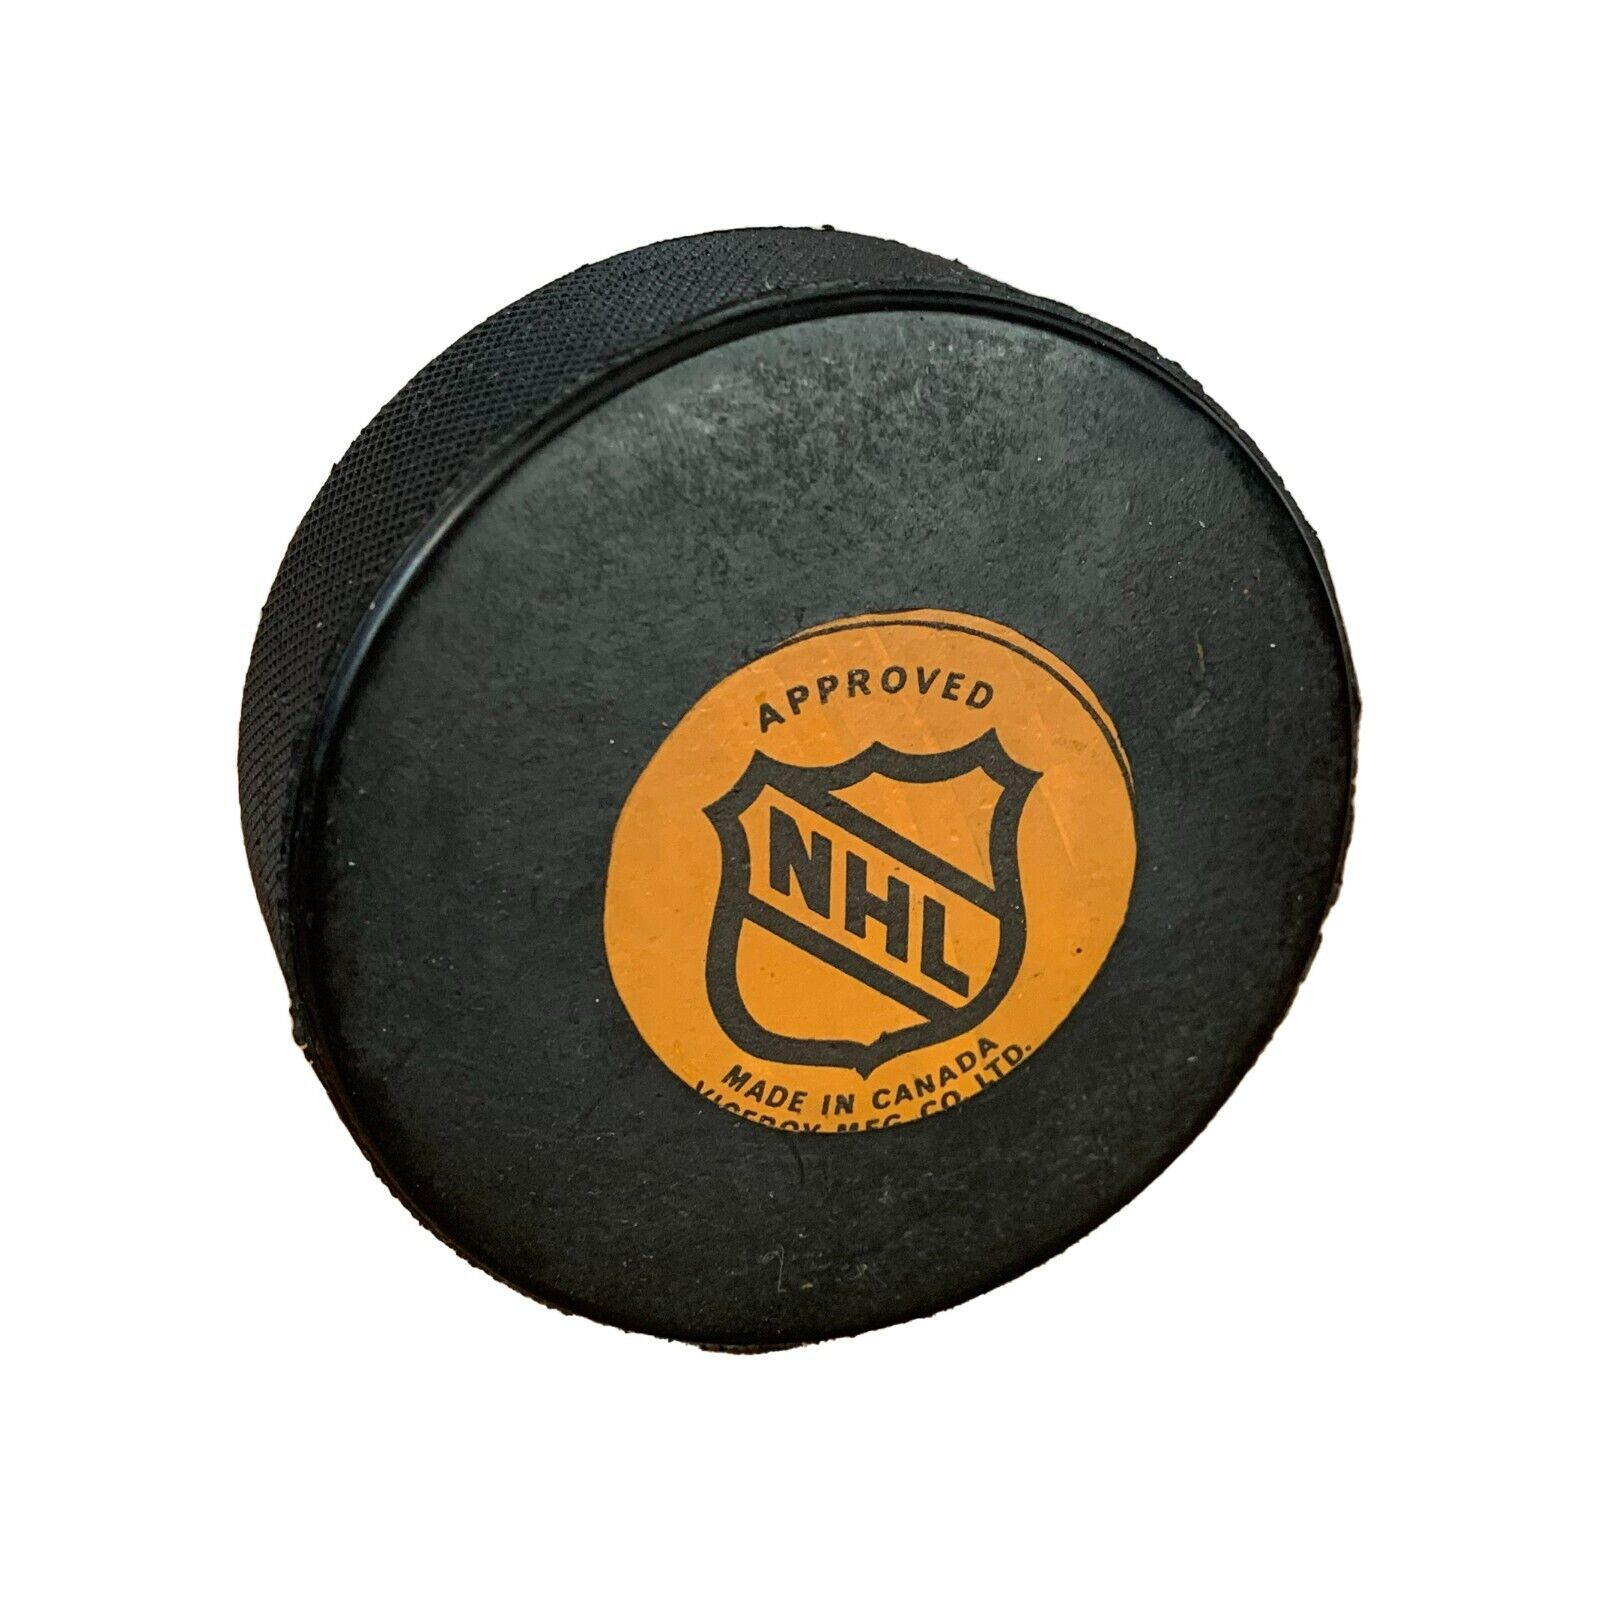 Montreal Canadiens Game Used Hockey Puck - 643-collectibles